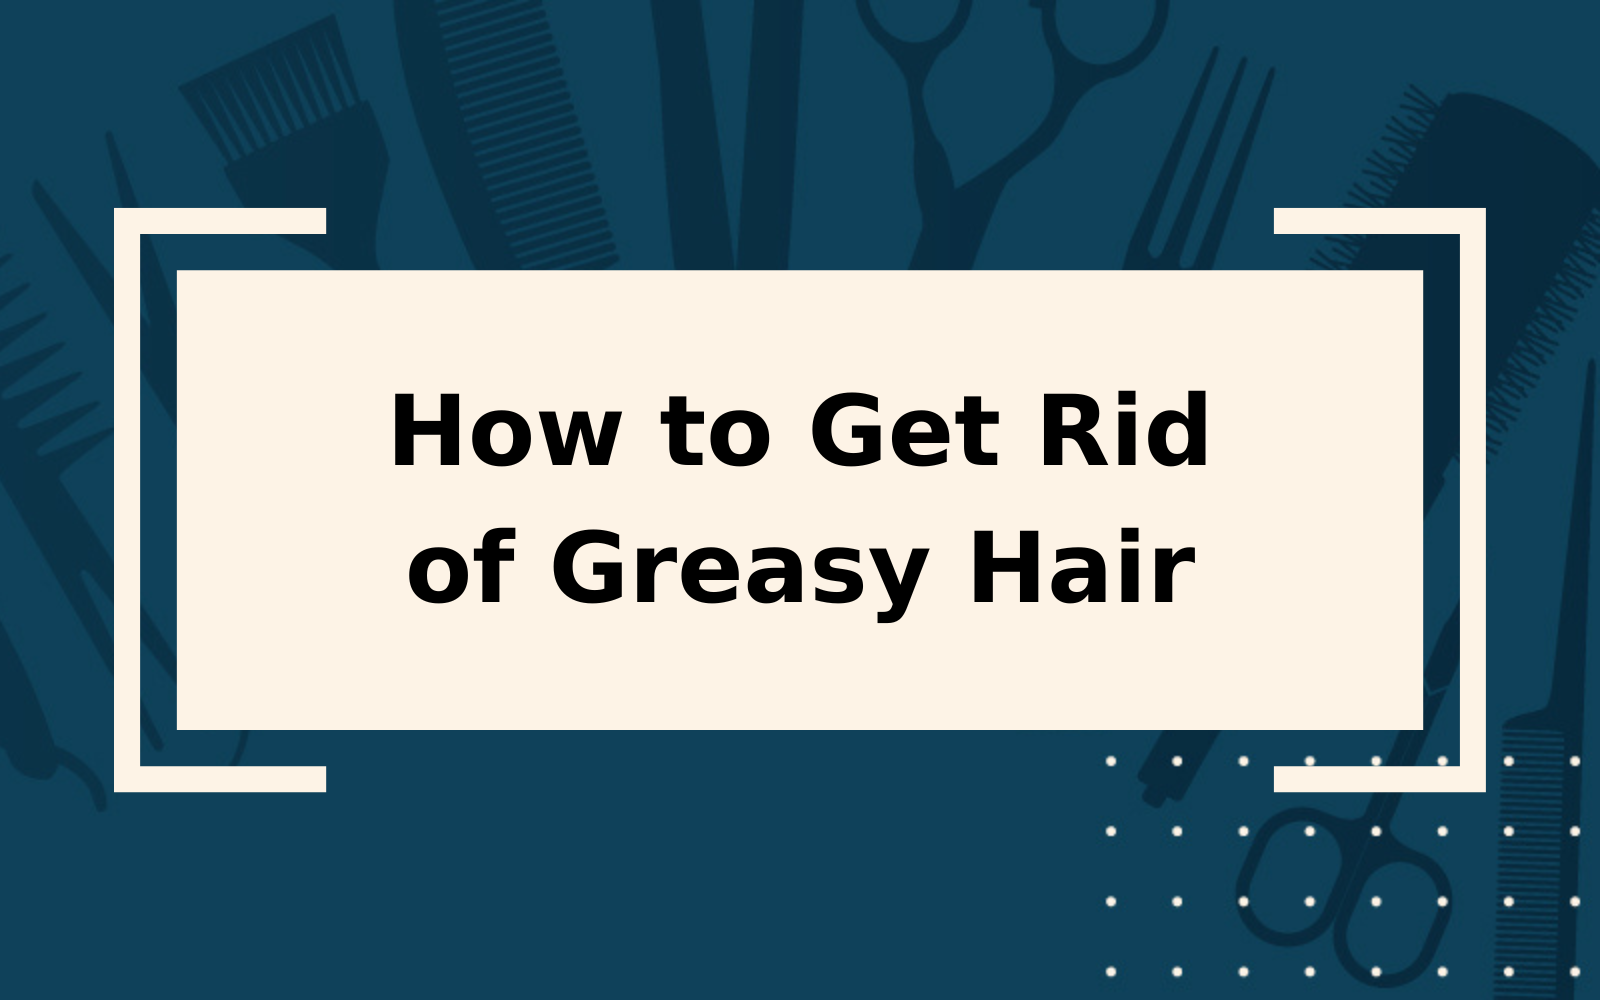 How to Get Rid of Greasy Hair | Step-by-Step Guide